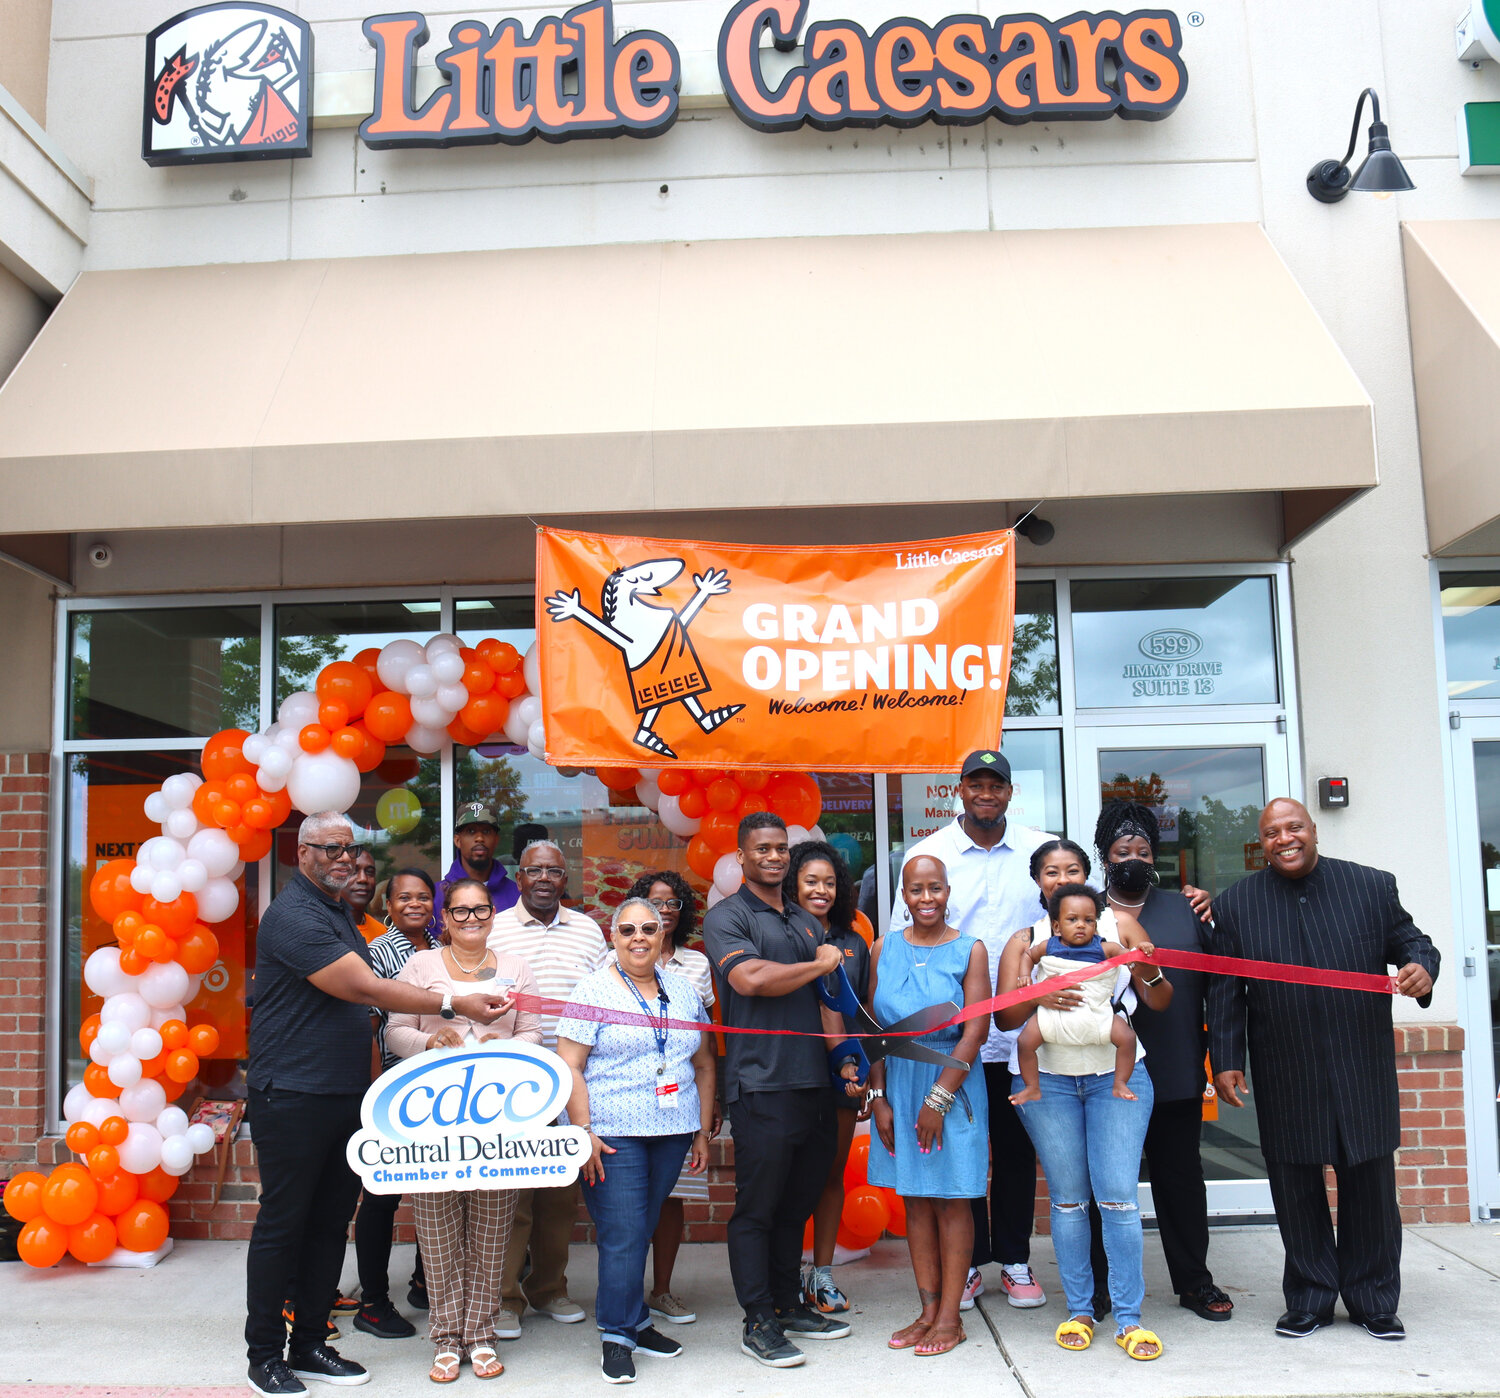 The Central Delaware Chamber of Commerce members and friends joined the Little Caesars Smyrna team and the community to celebrate the grand re-opening of this business under new ownership.